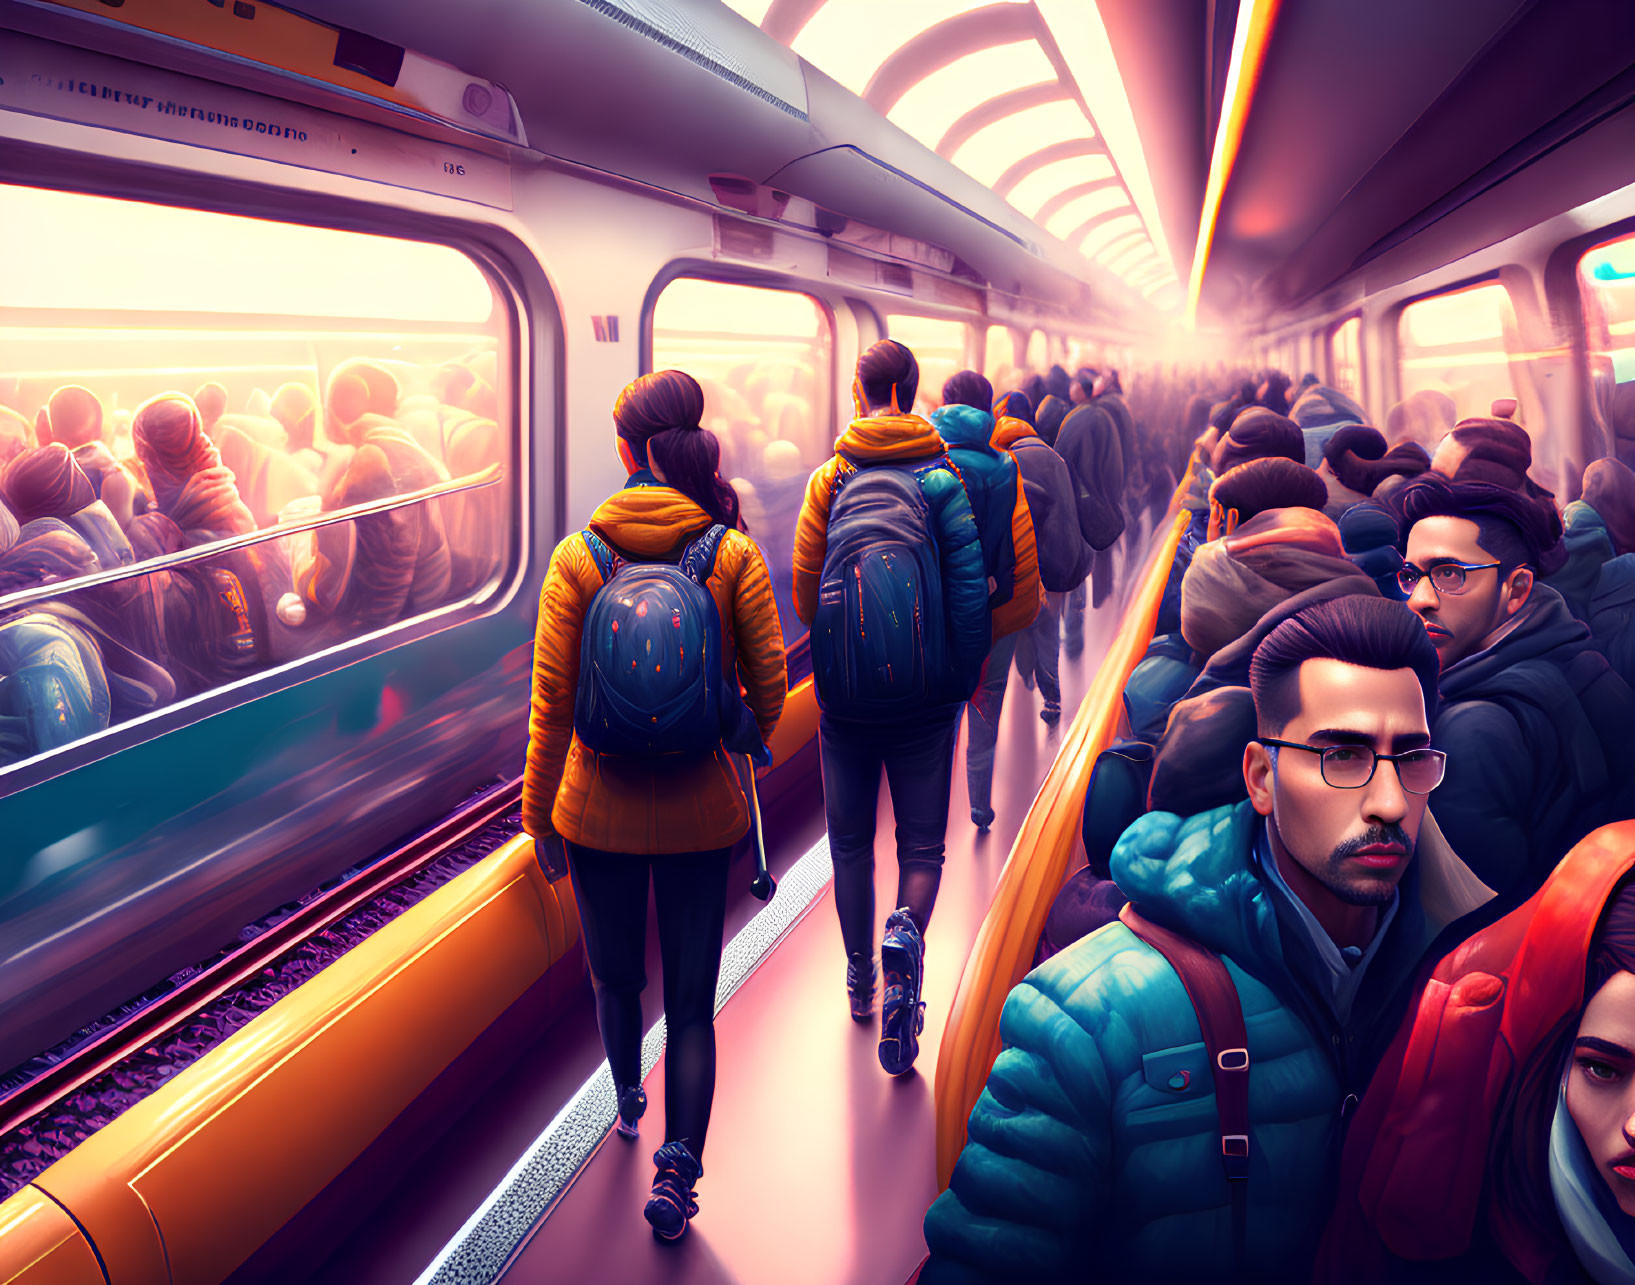 Crowded train carriage with passengers standing under warm orange light